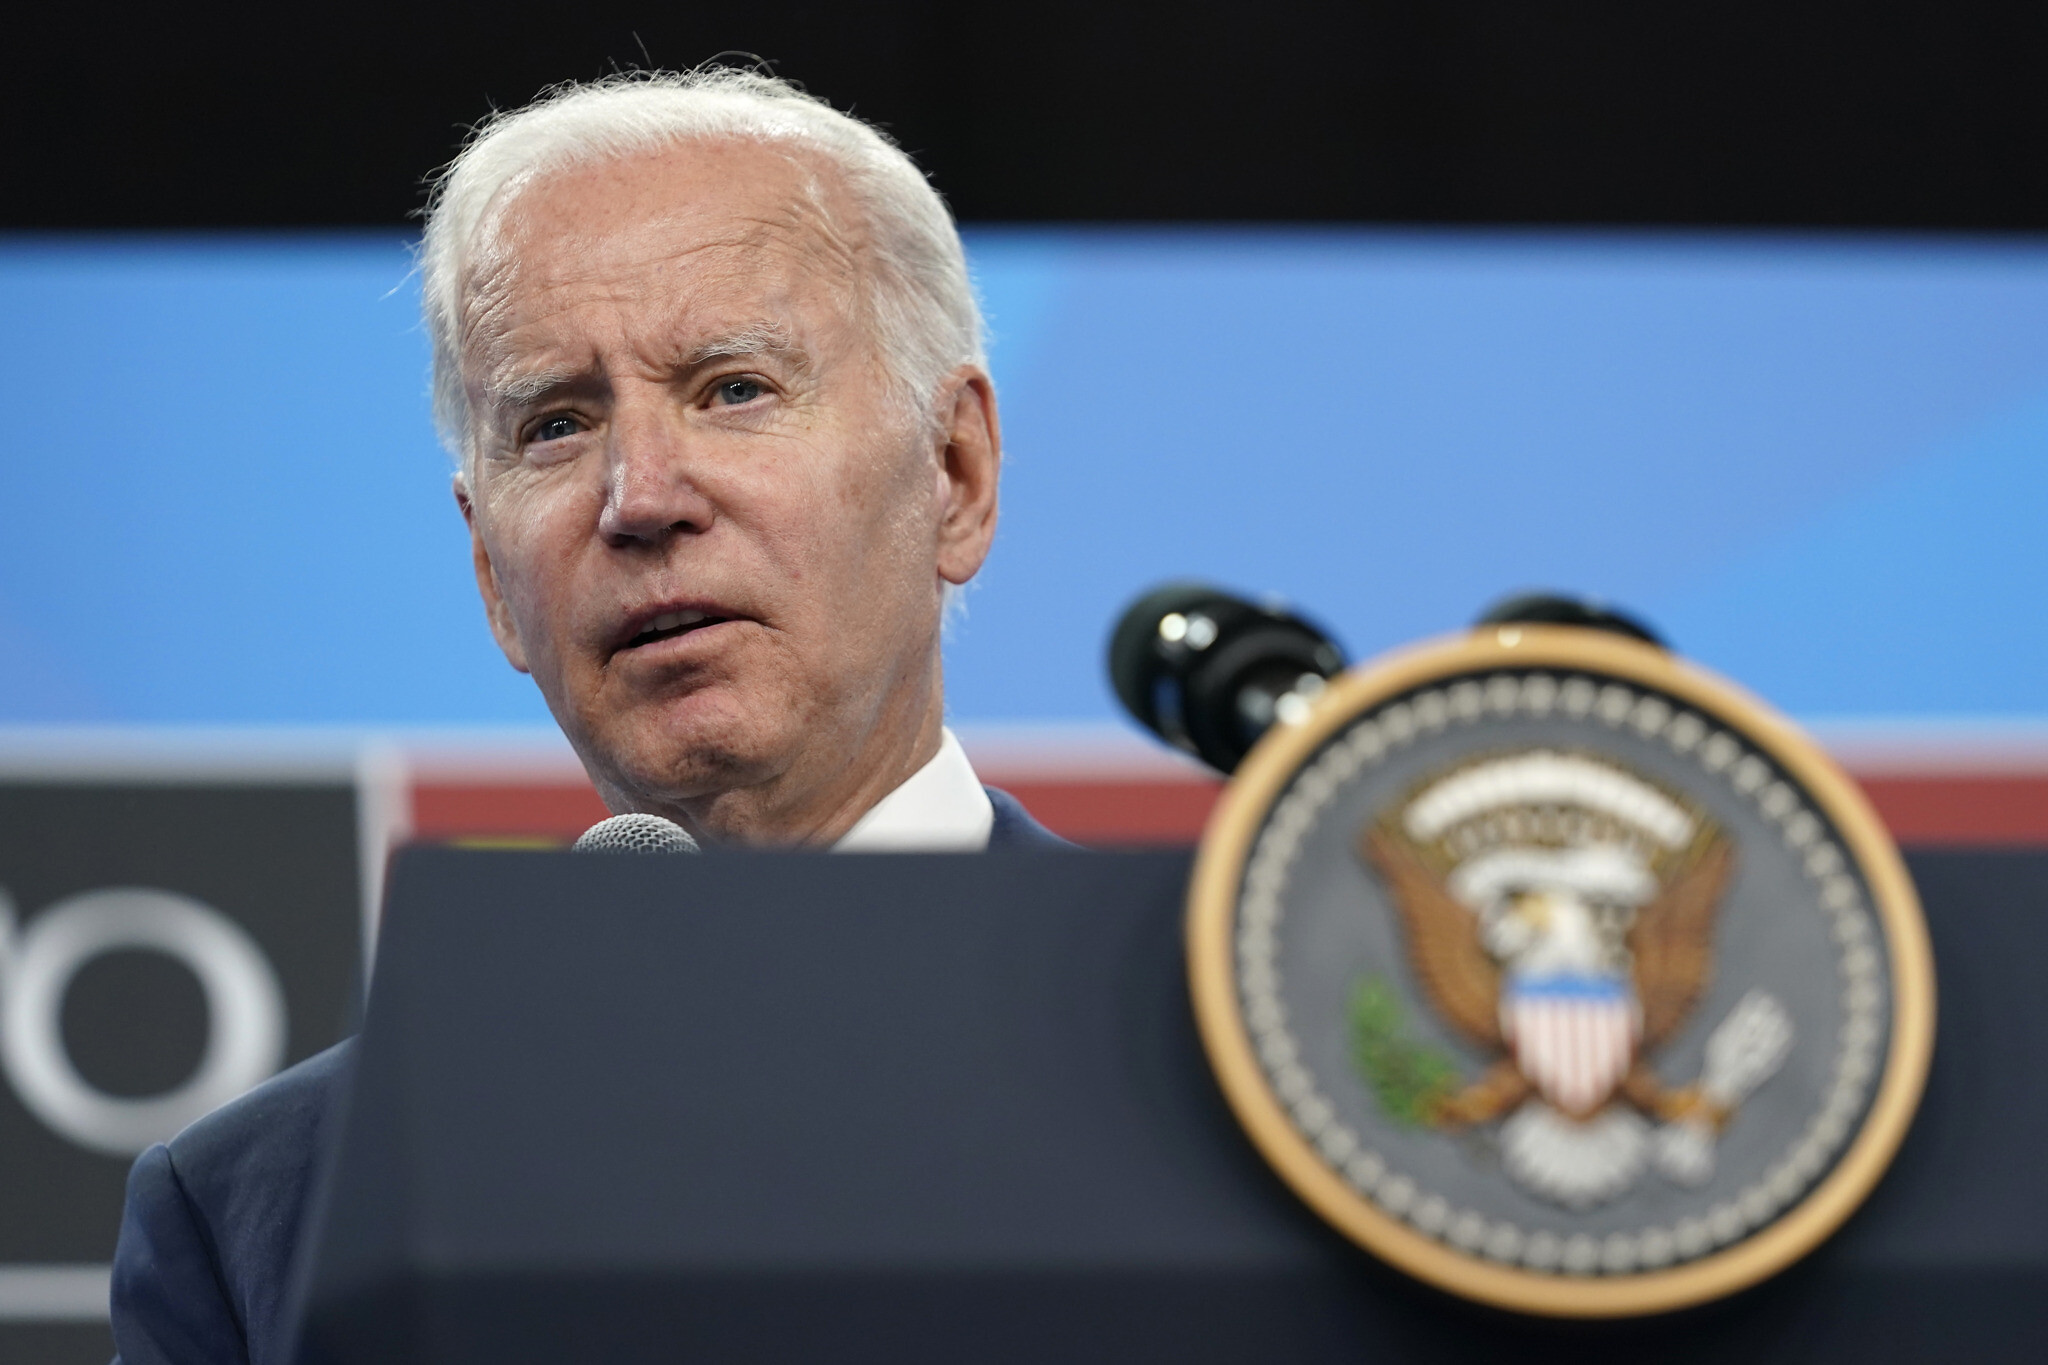 US President Joe Biden speaks during a news conference on the final day of the NATO summit in Madrid, June 30, 2022. (AP Photo/Susan Walsh)